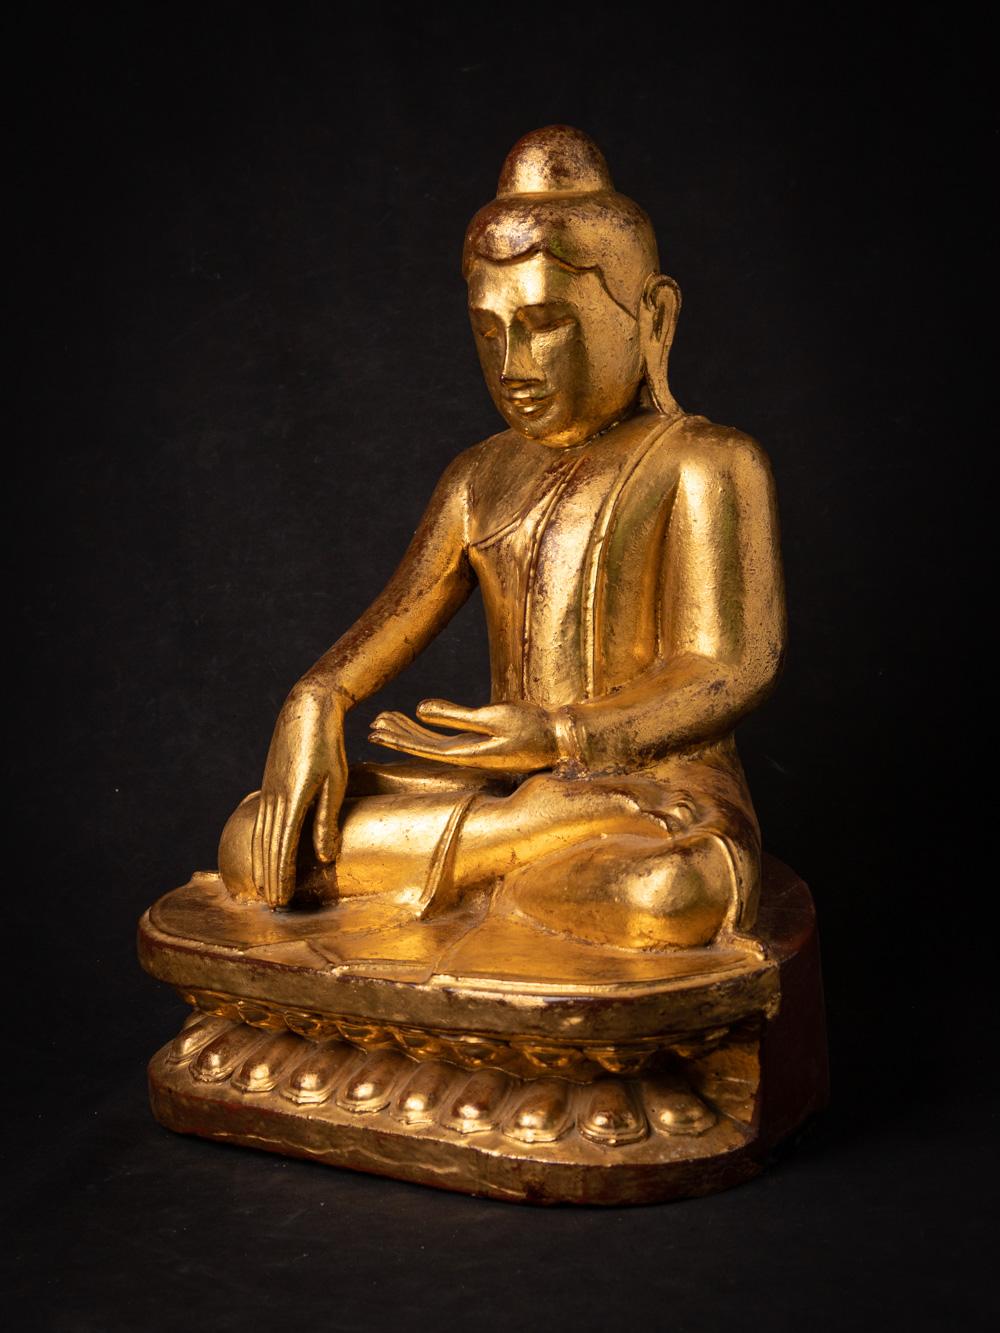 The antique wooden Burmese Lotus Buddha is a captivating and spiritually significant artifact originating from Burma. Crafted from wood and adorned with 24-karat gold gilding, this Buddha statue stands at 46 cm in height and measures 32.5 cm in